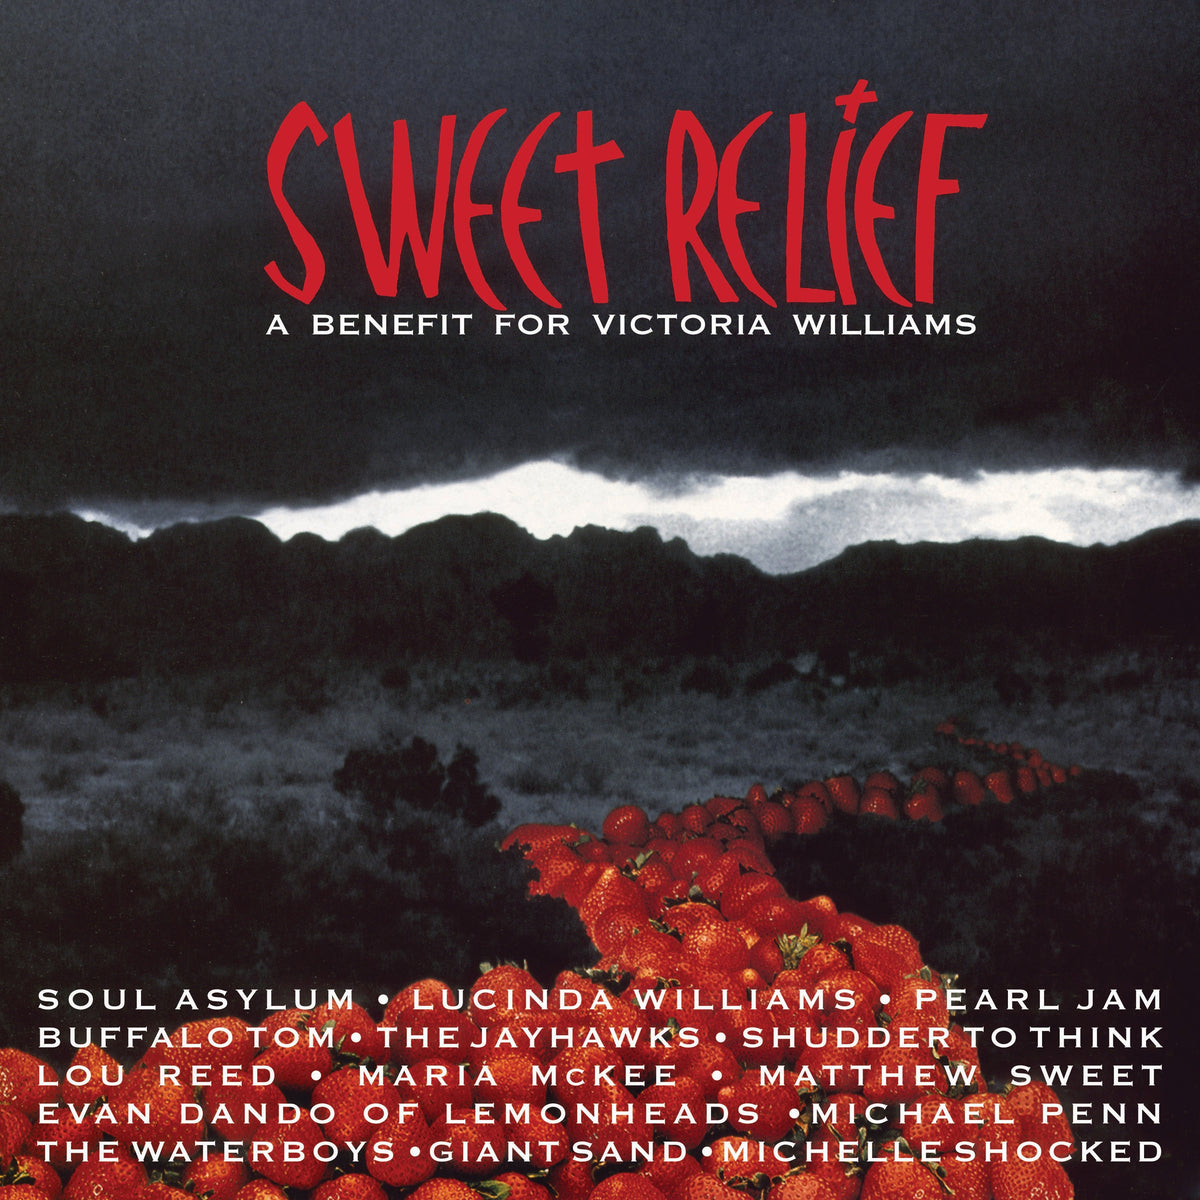 V/A – Sweet Relief: A Benefit For Victoria Williams 2LP (RSD Exclusive 2022)